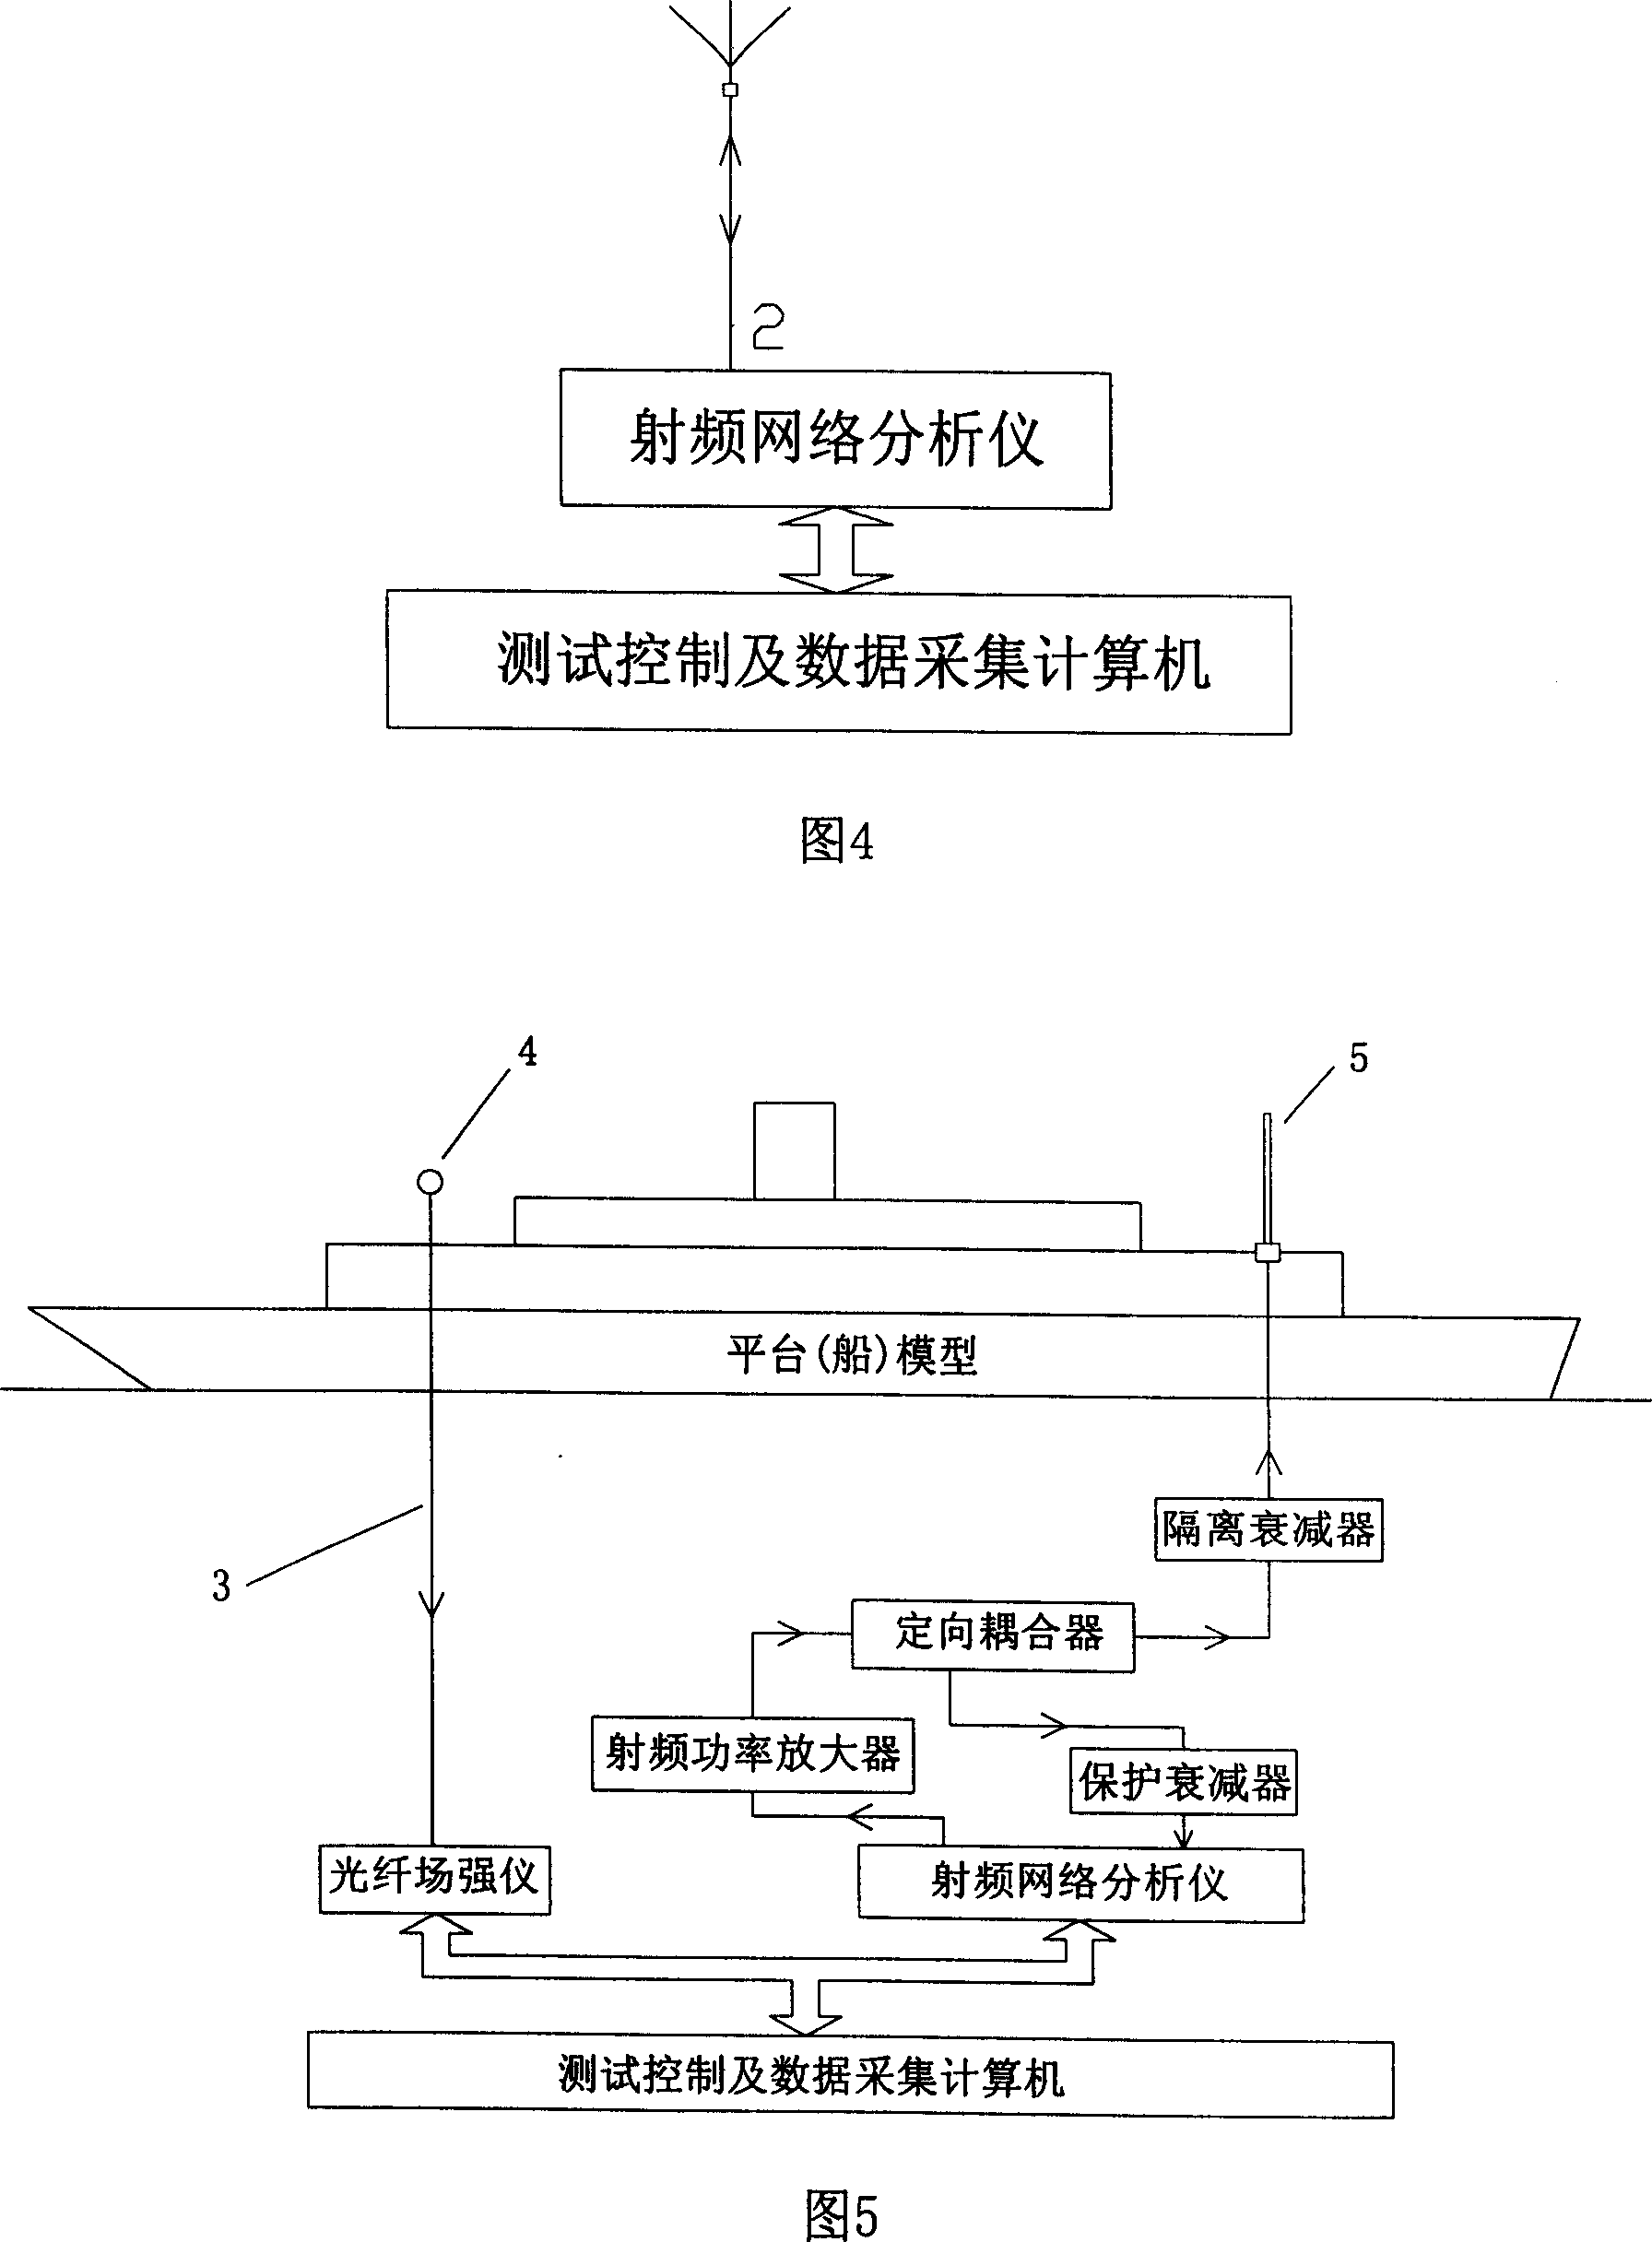 Predicted method of radiation field strength mode of short wave antenna